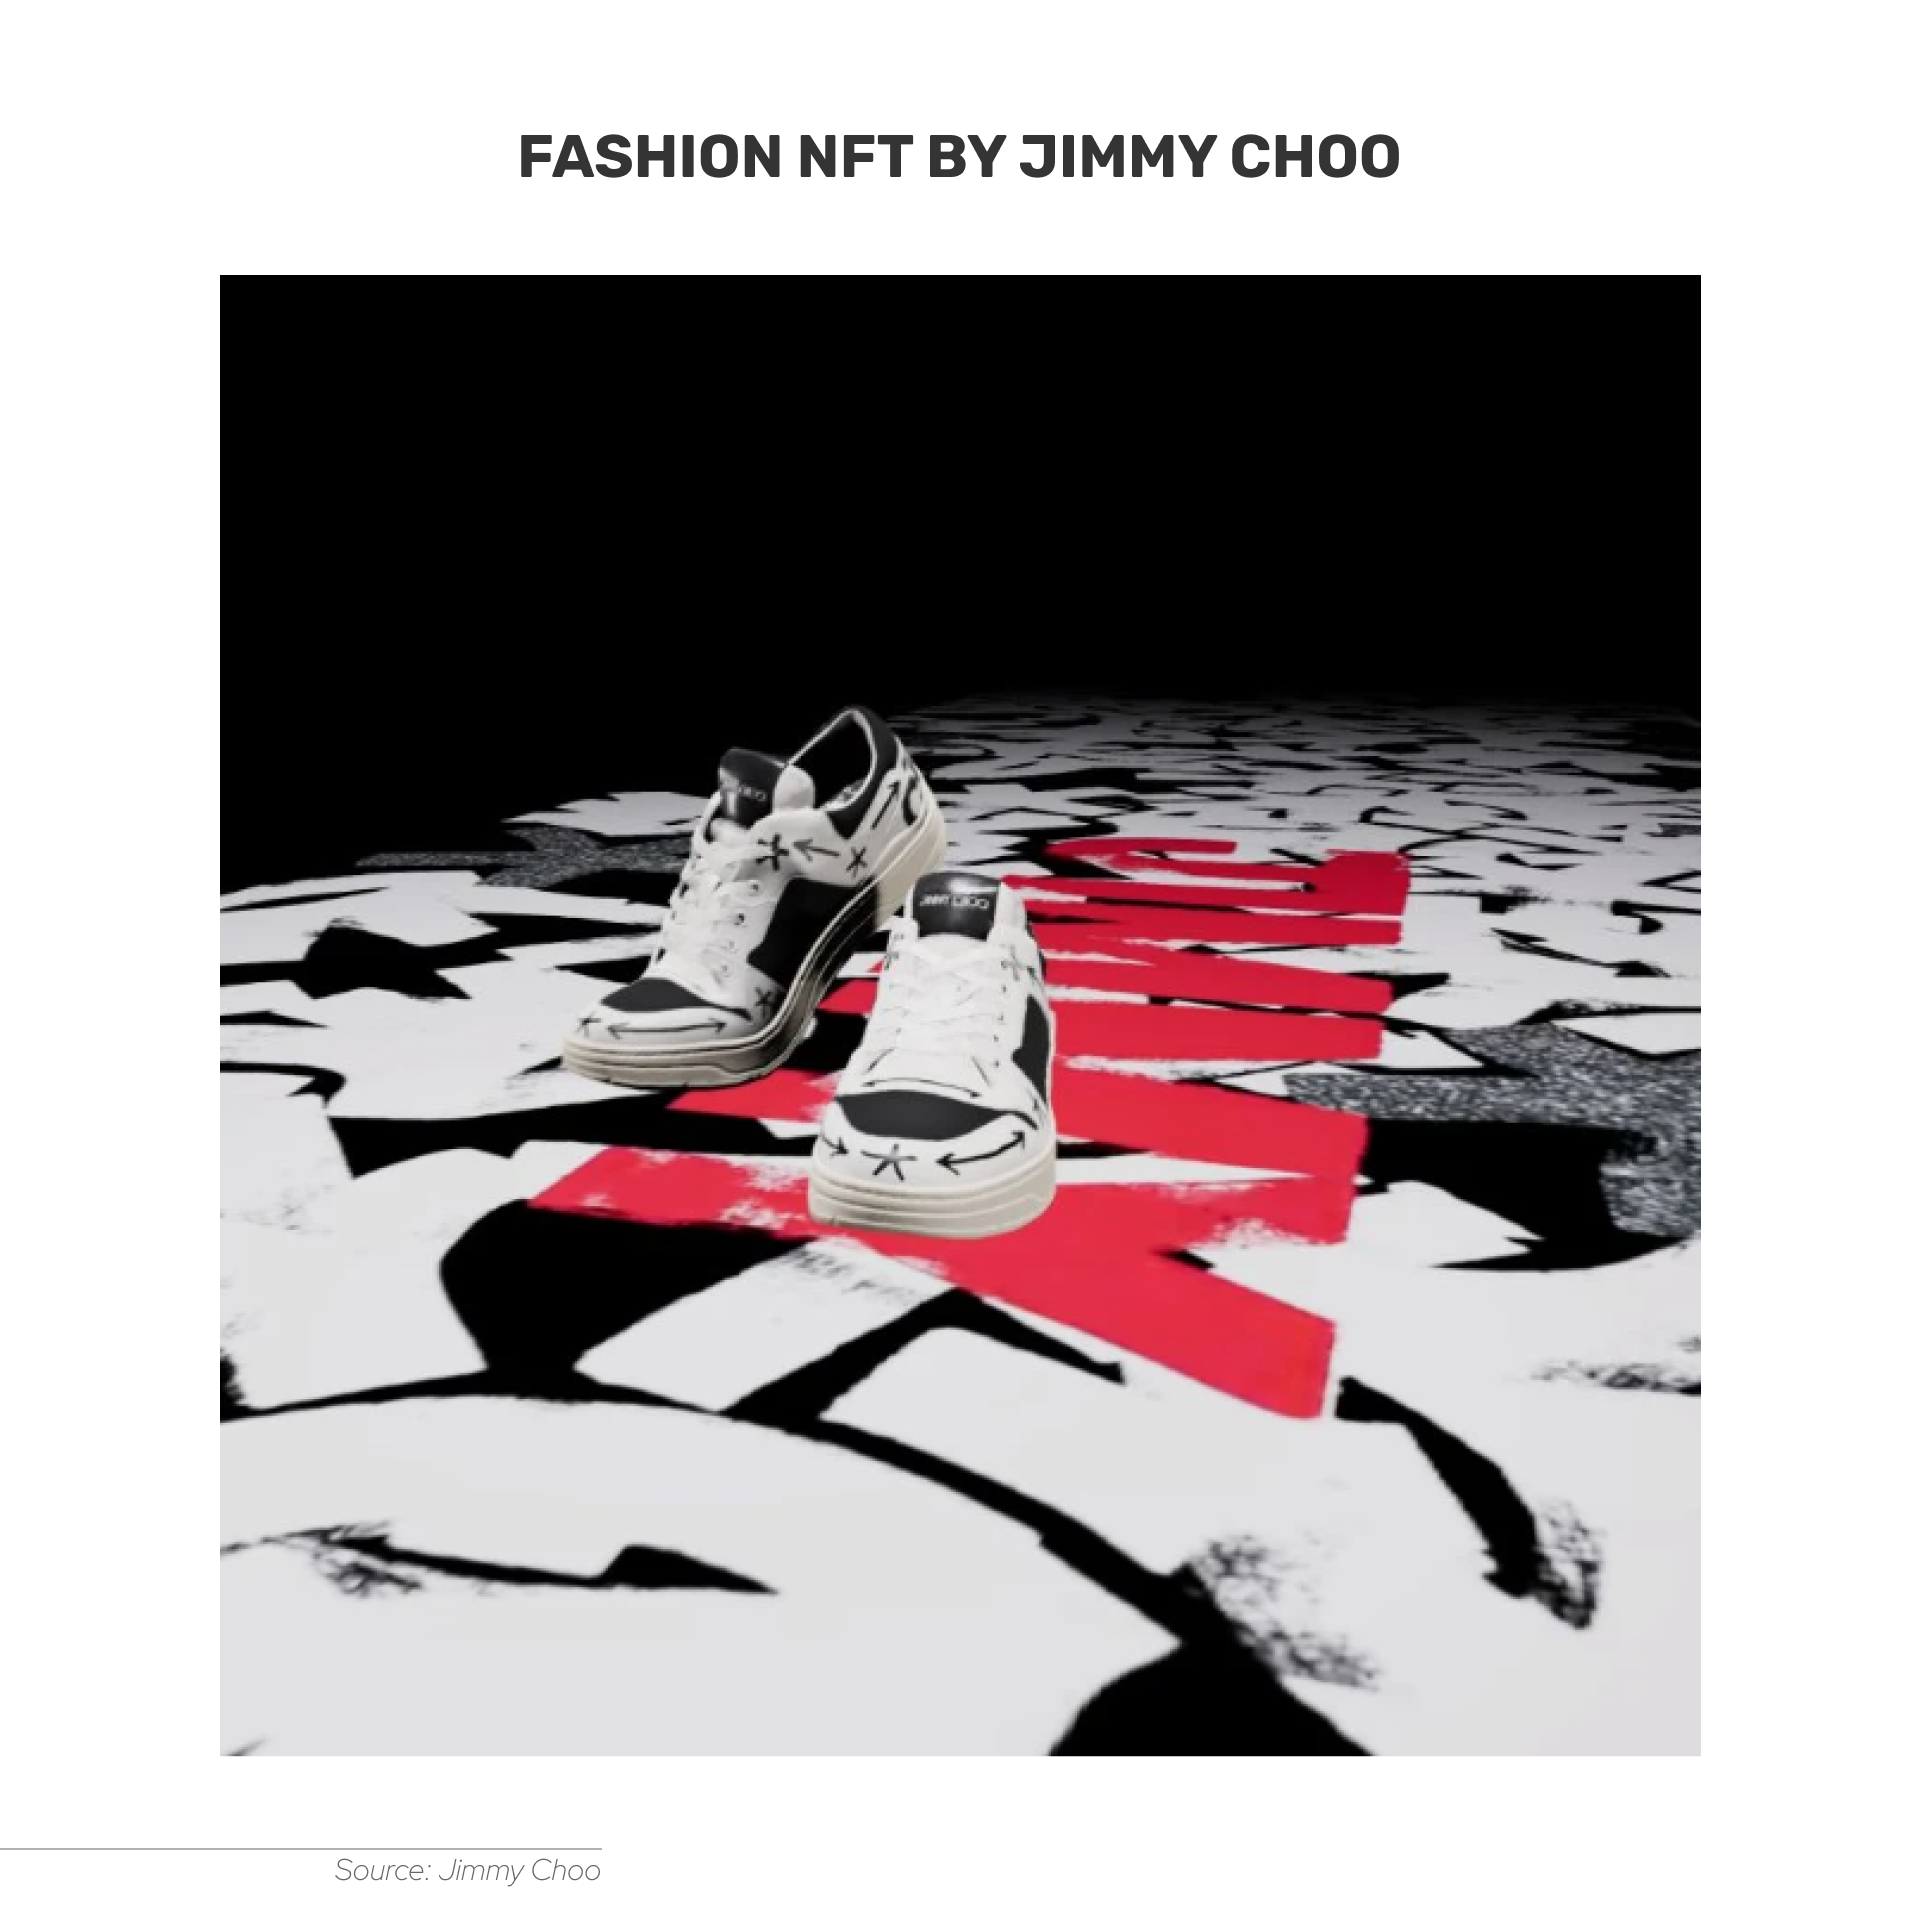 Jimmy Choo released a collection of NFT sneakers.